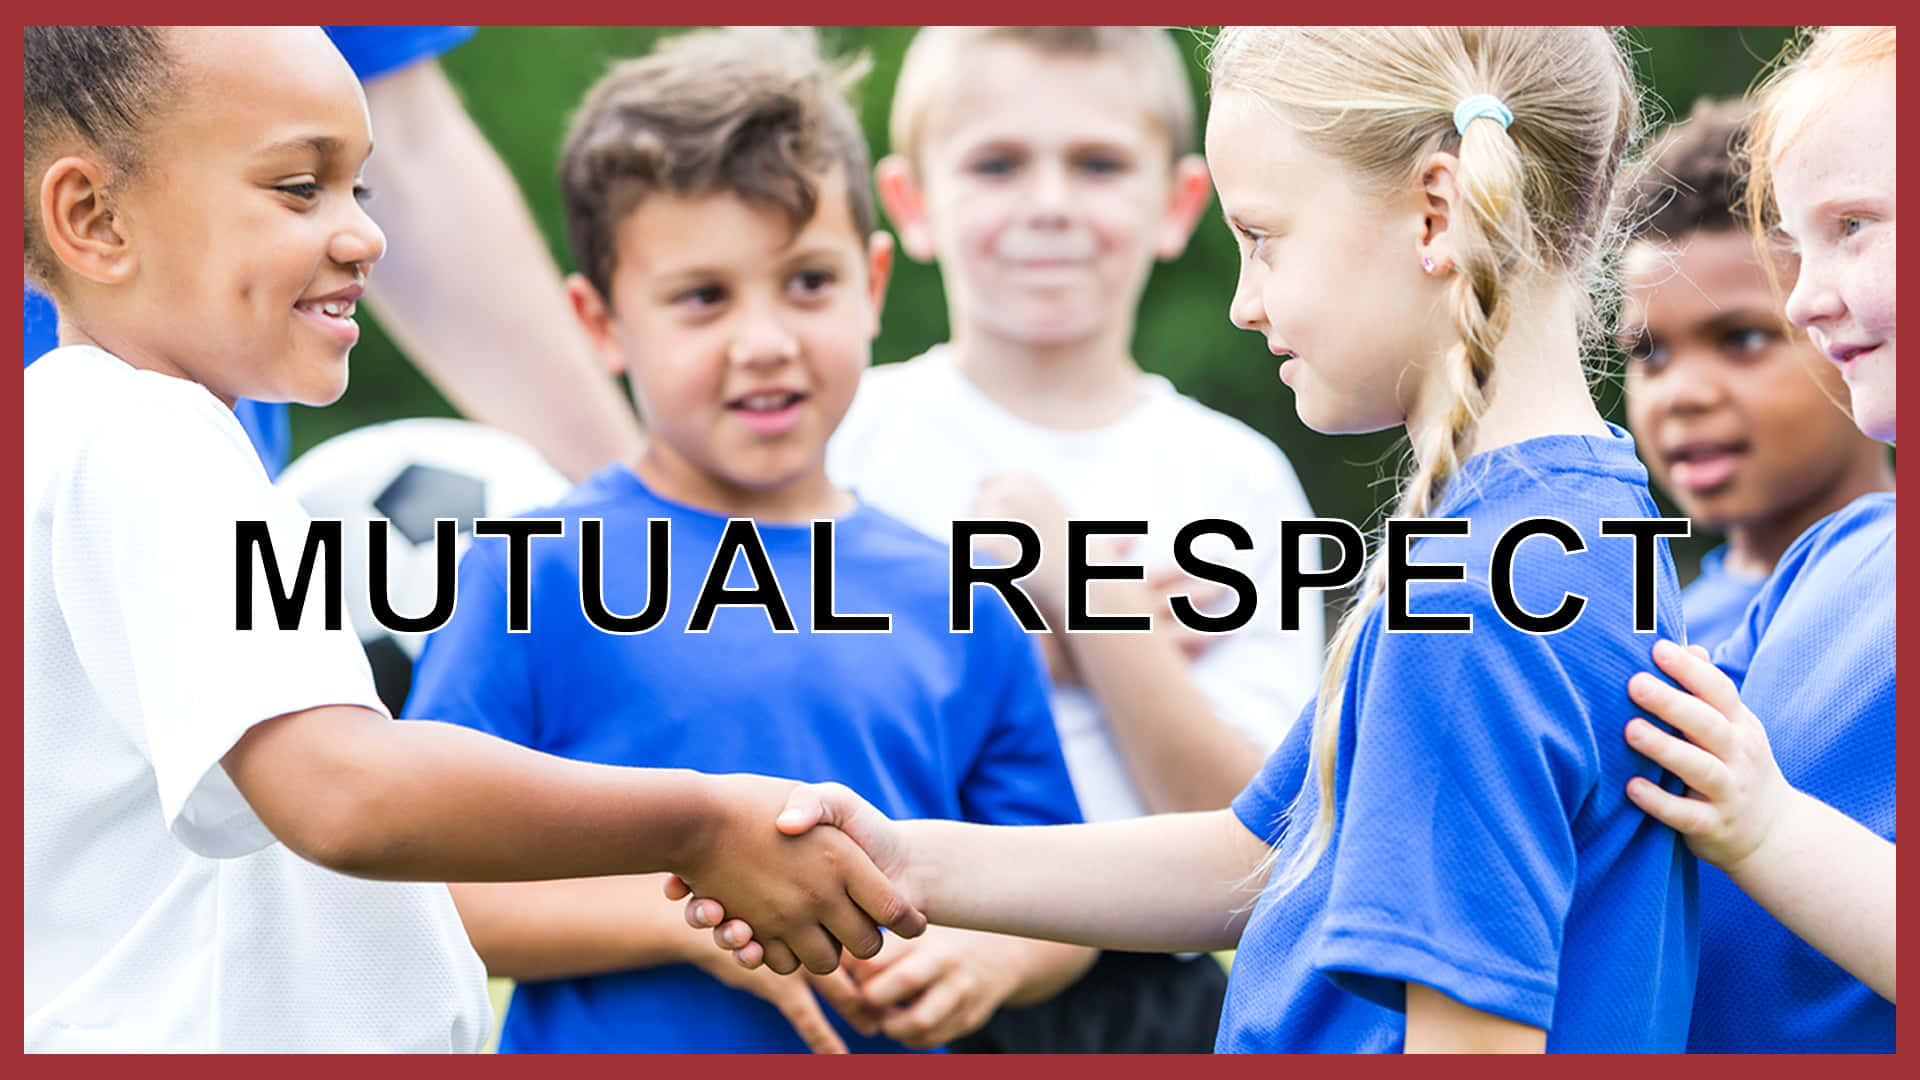 Mutual Respect - A Group Of Children Shaking Hands